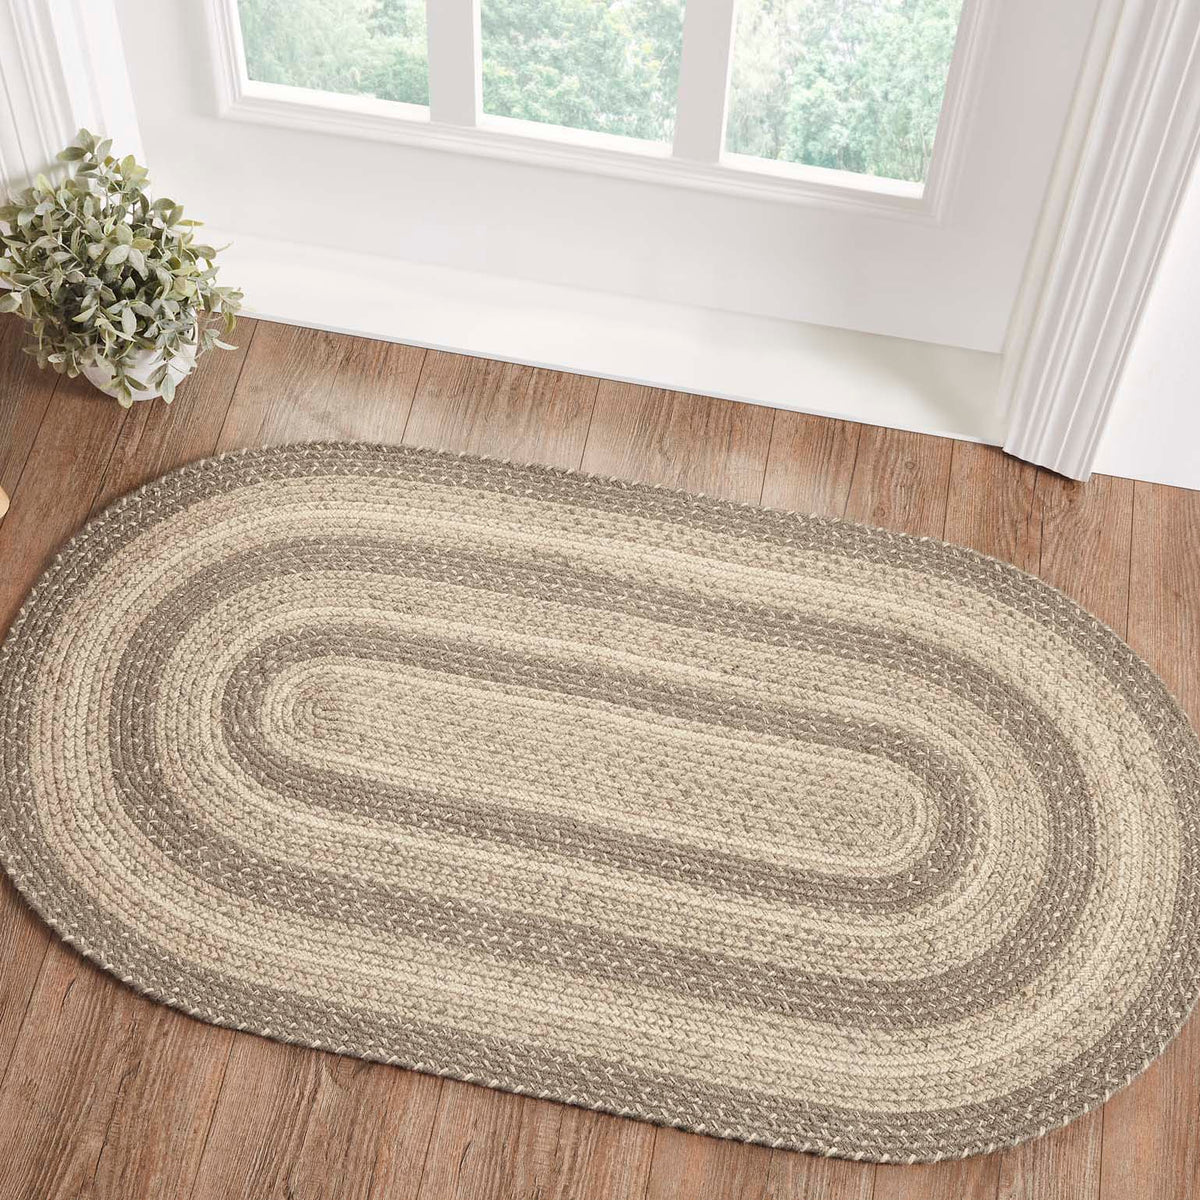 Ginger Spice Jute Rug Oval w/ Pad 27x48 – Beth's Country Primitive Home  Decor